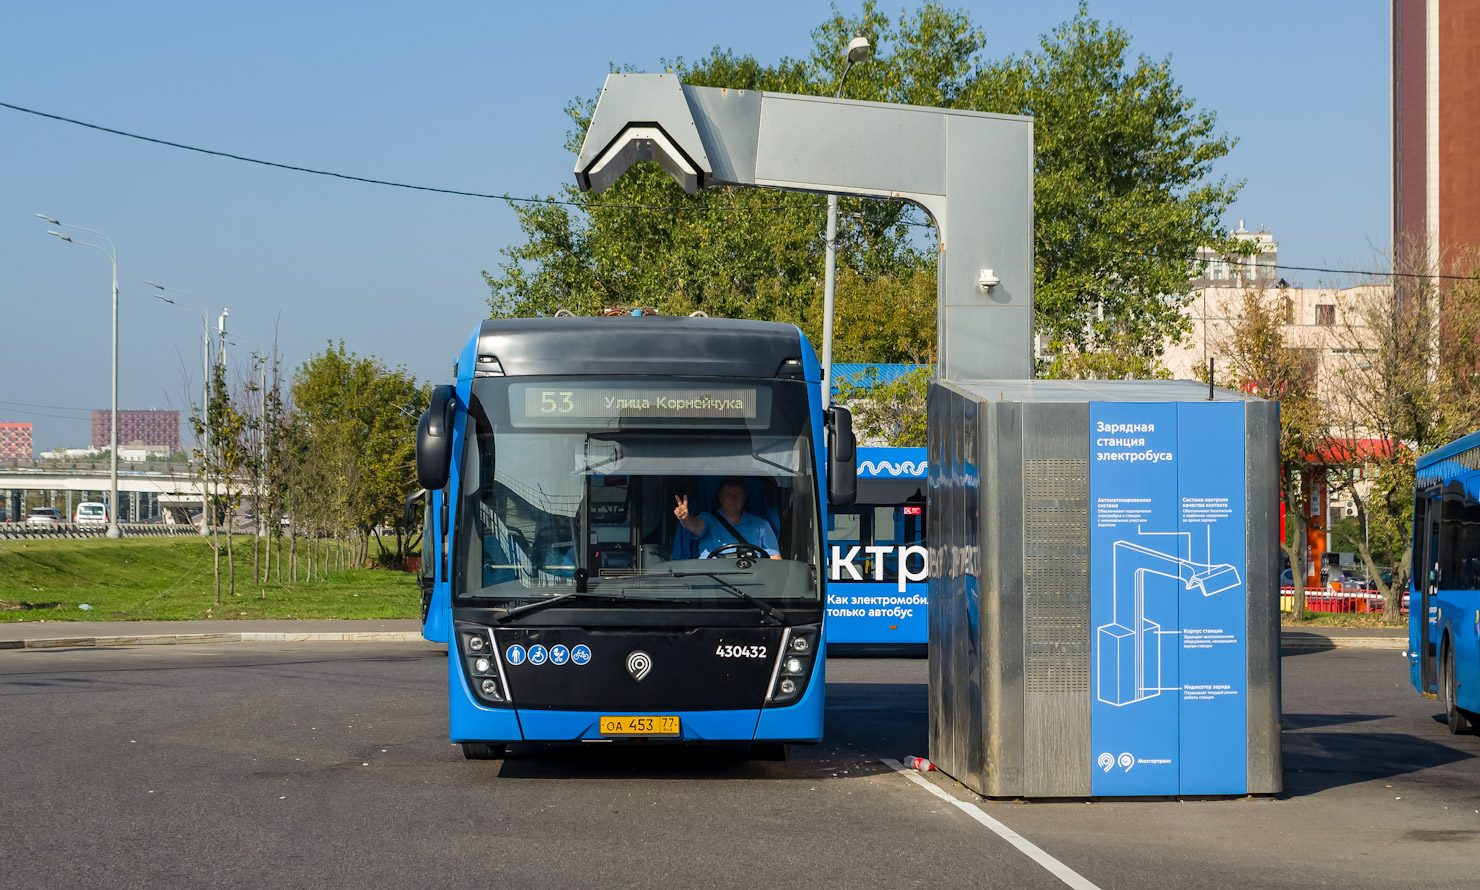 Moskva, KAMAZ-6282 № 430432; Moskva — Electric power service — Charging stations; Moskva — Terminus stations